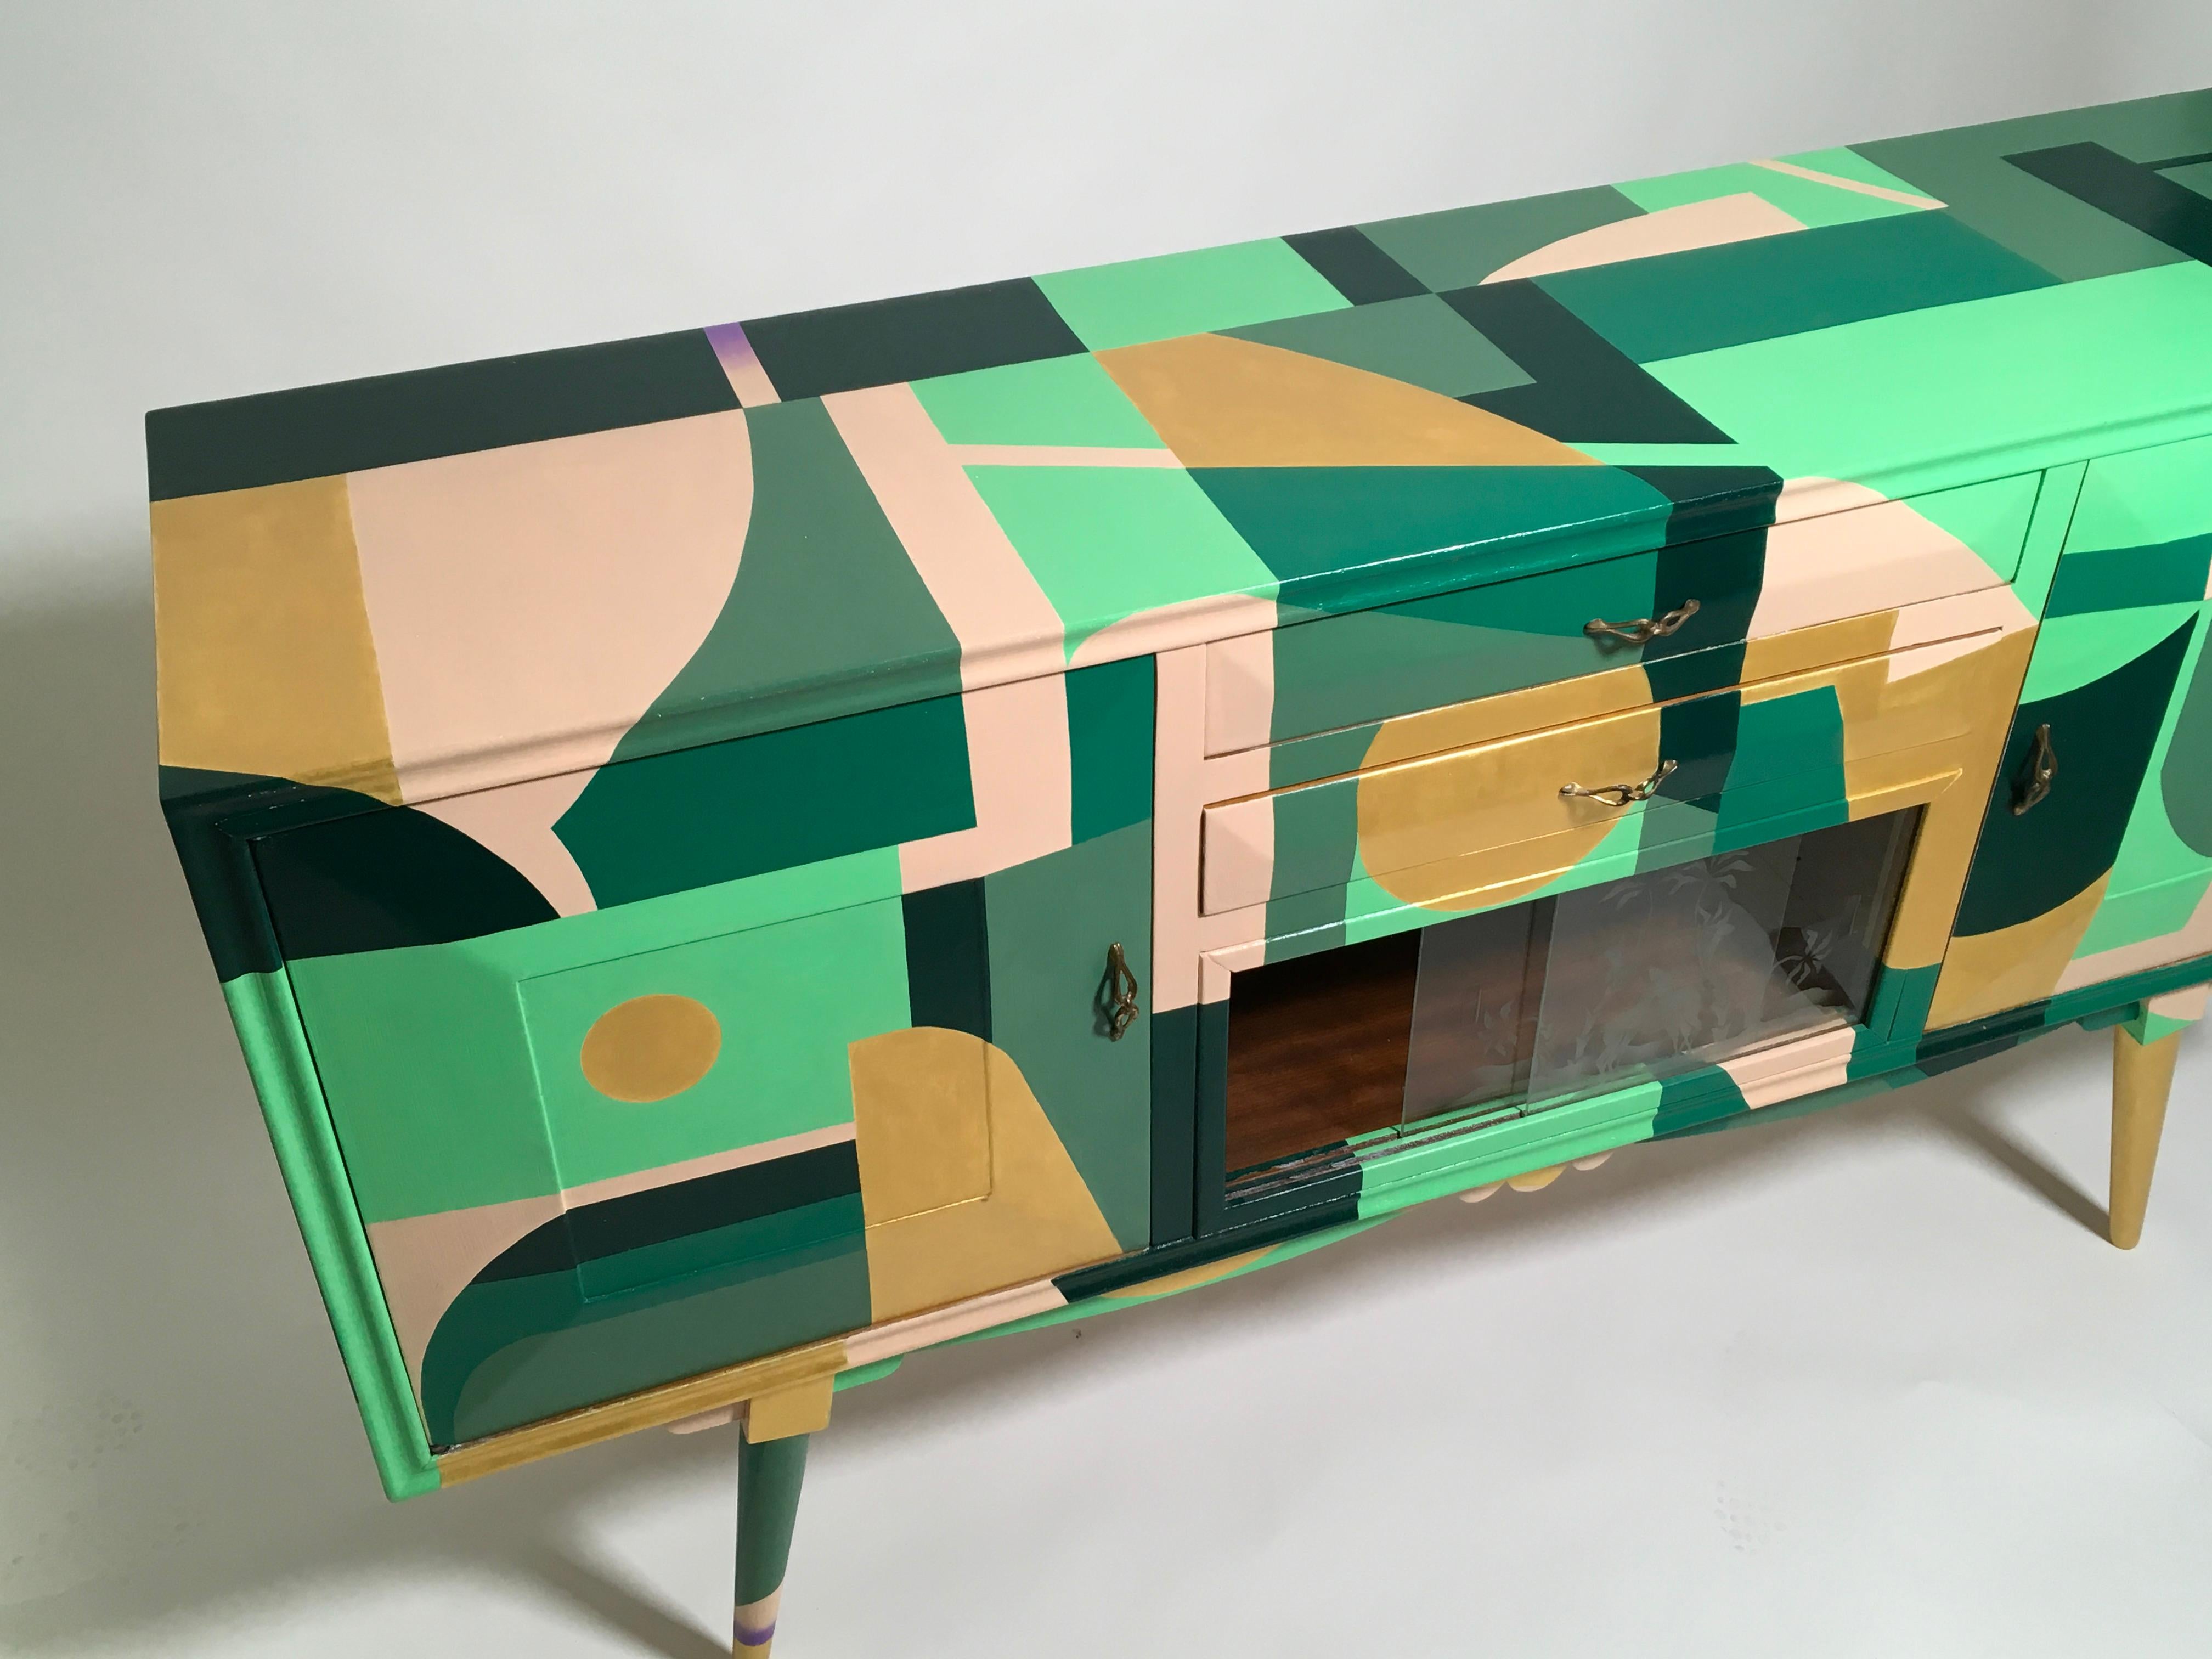 Original Credenzas from the Redesign Collection designed by Alessandro Guerriero for the Alchimia Group, 1990. Vintage furniture decorated with acrylic. Hand painted. 
Exhibited at the show 